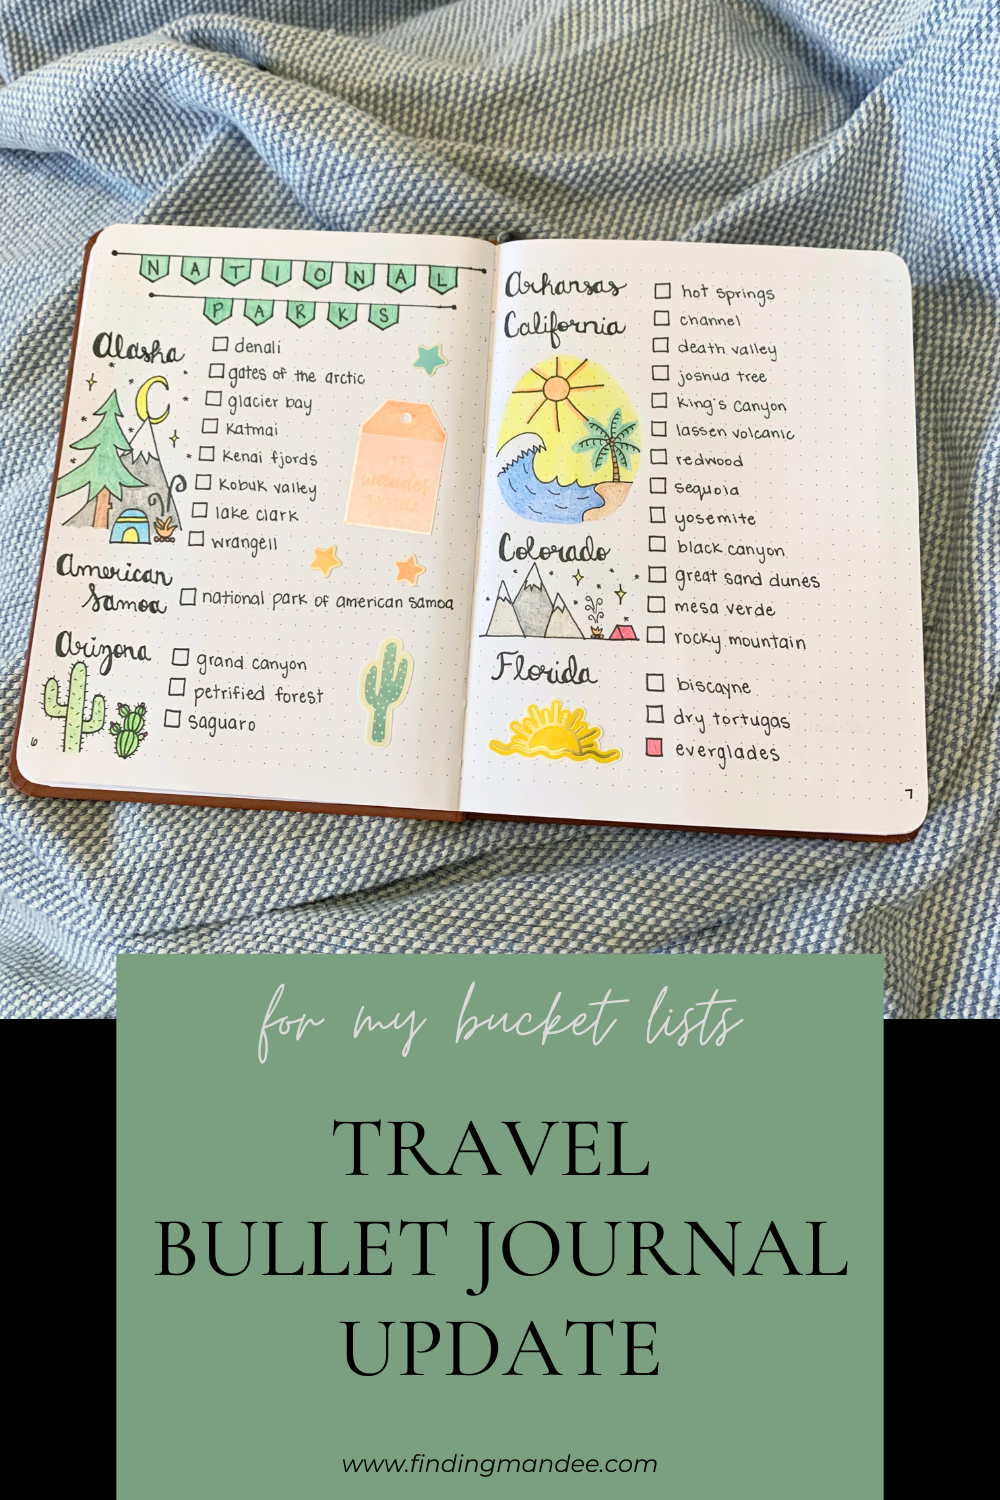 How I Made a Travel Bullet Journal for my Bucket Lists | Finding Mandee